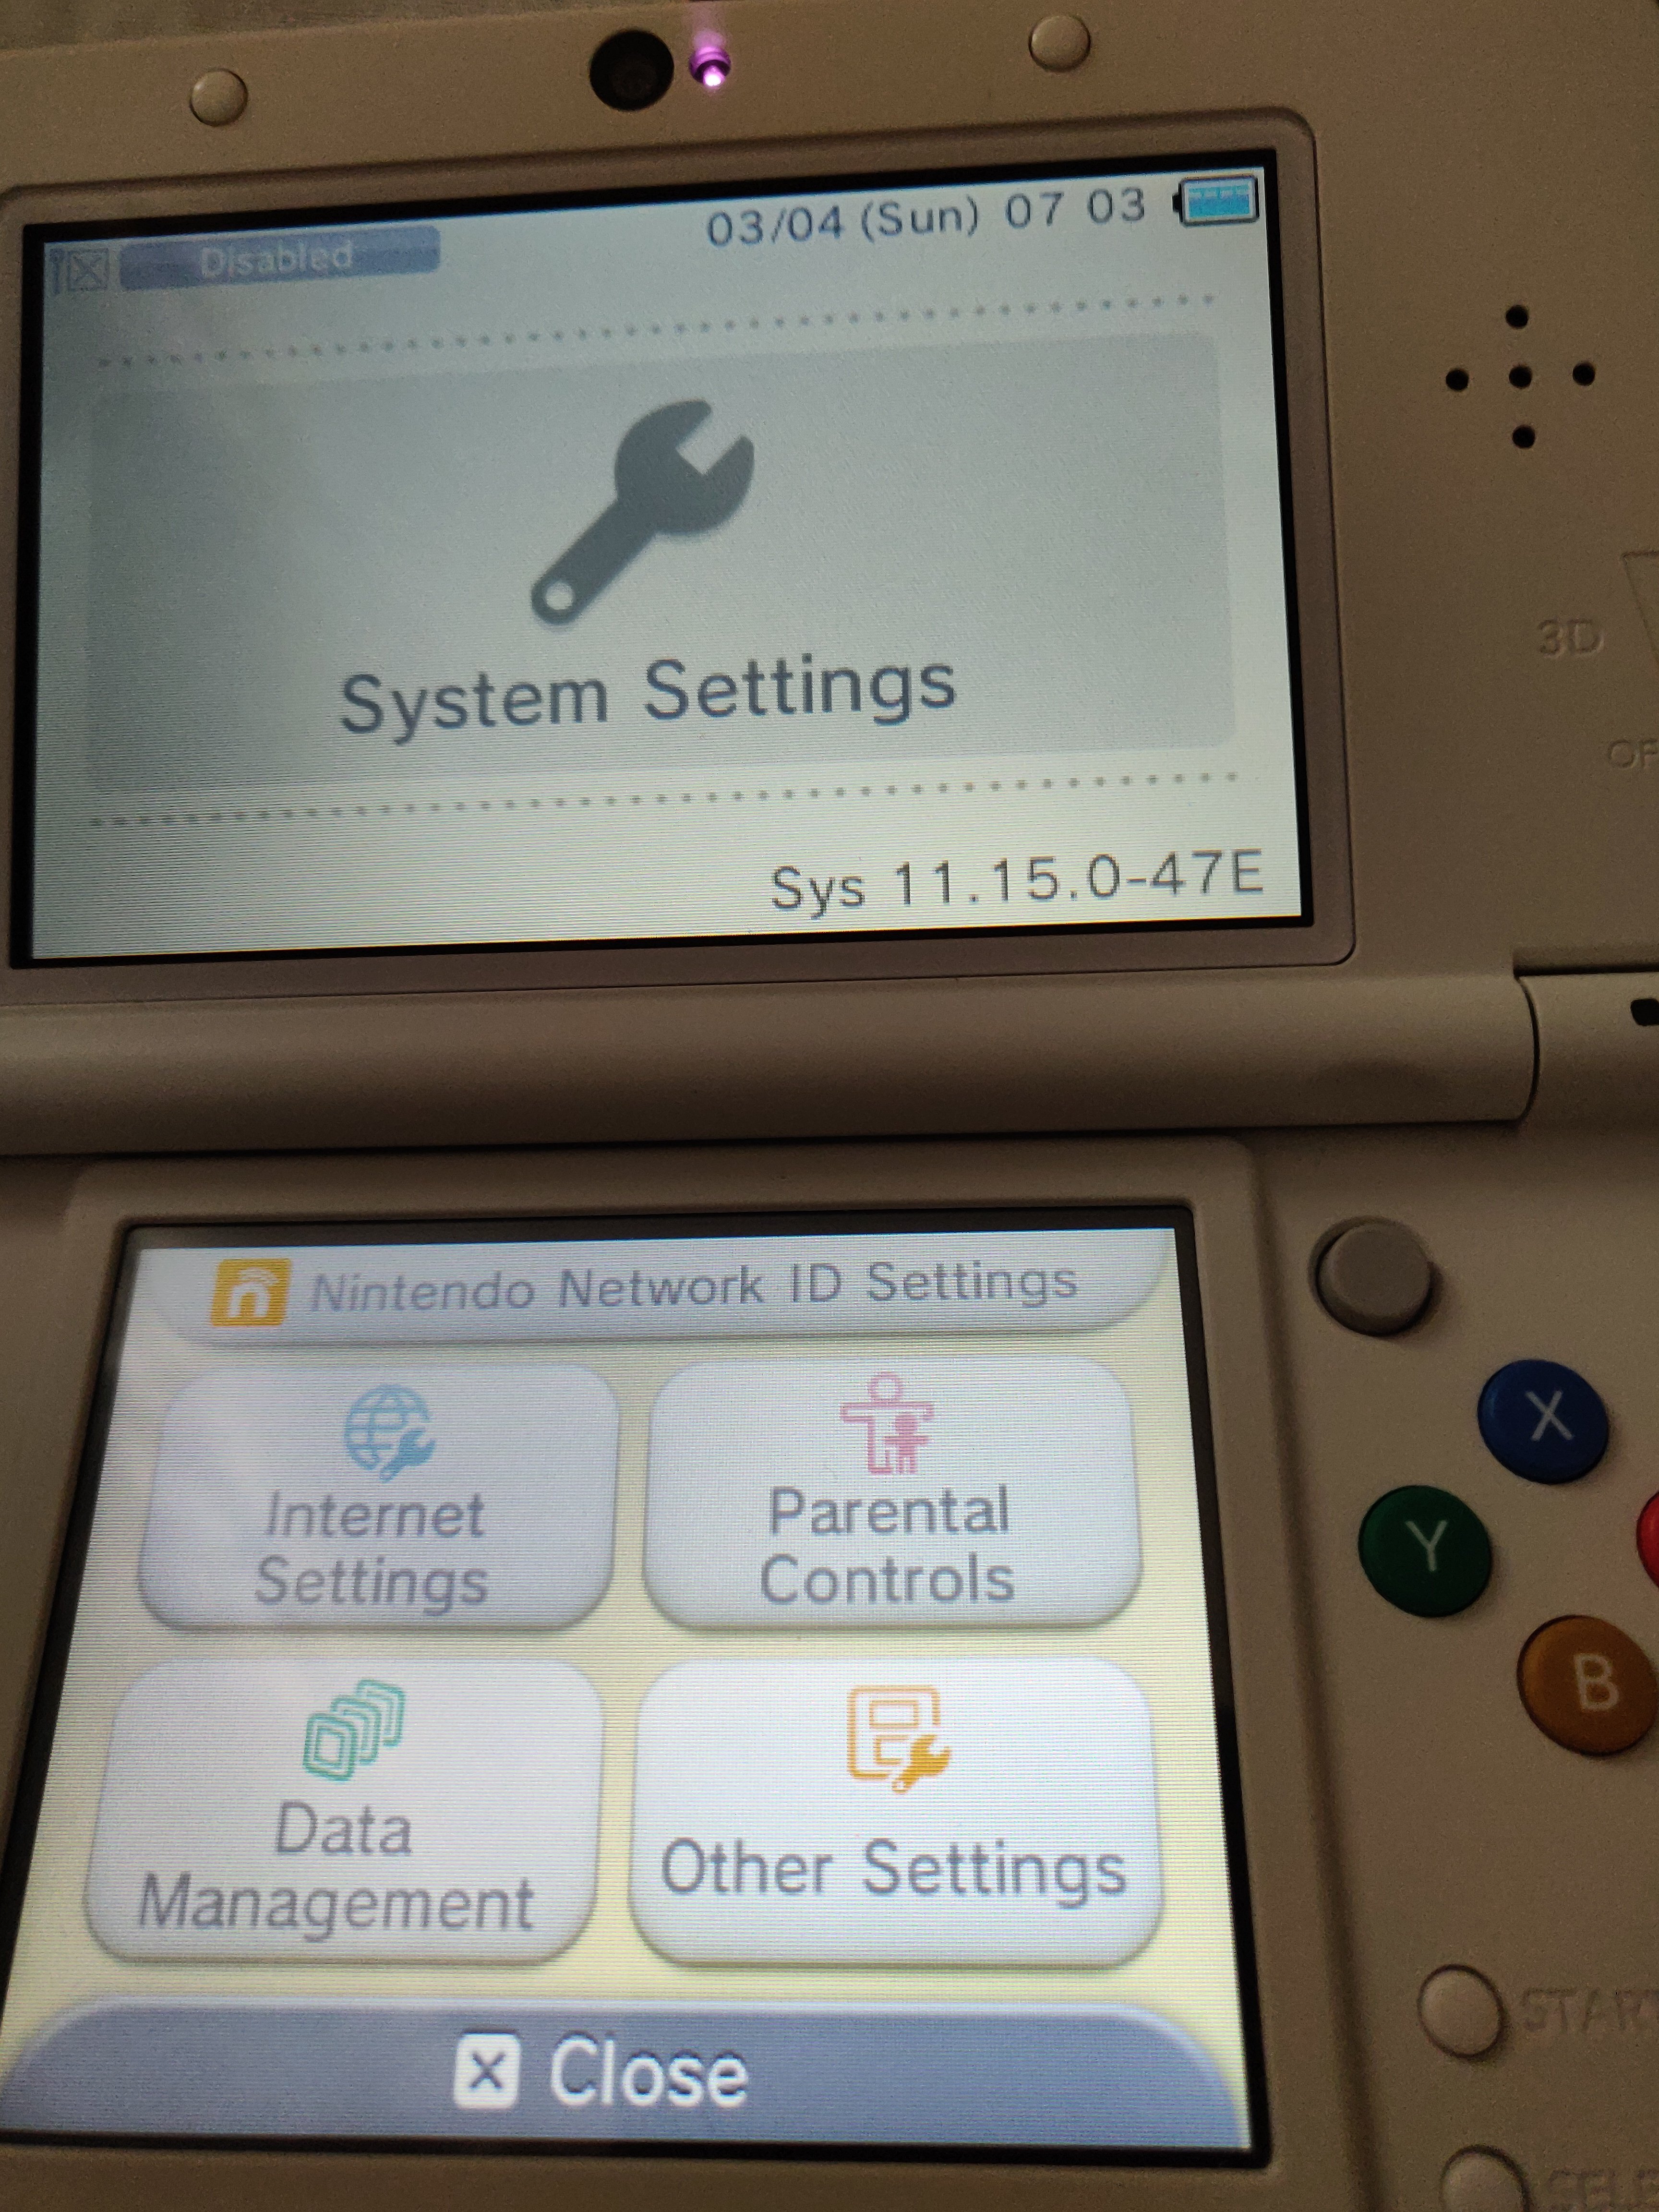 Bought a used N3DS, factory reset, unknowing it had jailbreak installed | GBAtemp.net - The Independent Video Game Community